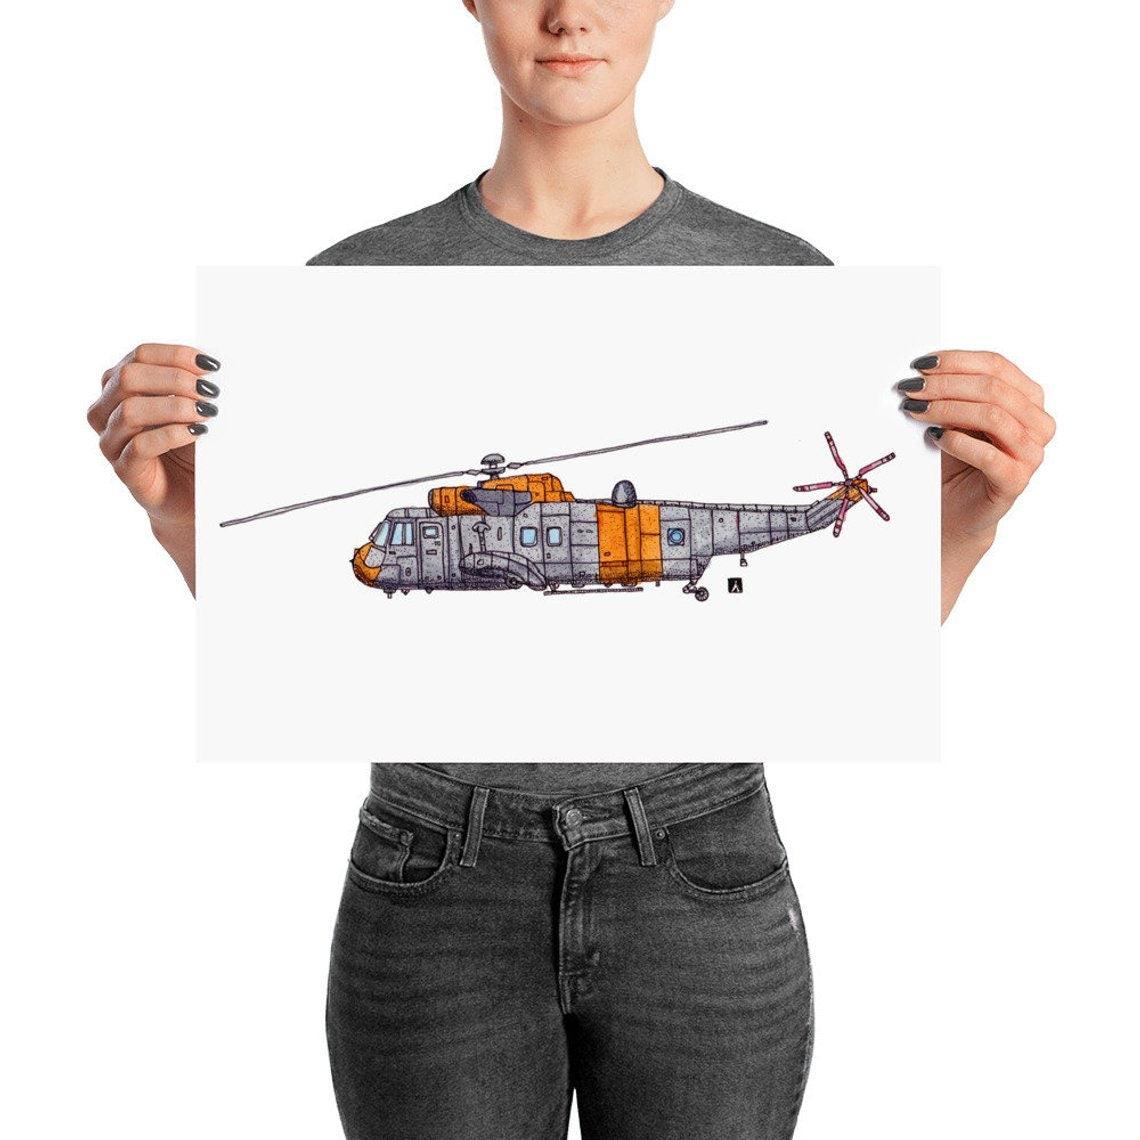 BellavanceInk: Pen & Ink Drawing With Watercolor of a Sea King Helicopter (Limited Prints Also Available) - BellavanceInk